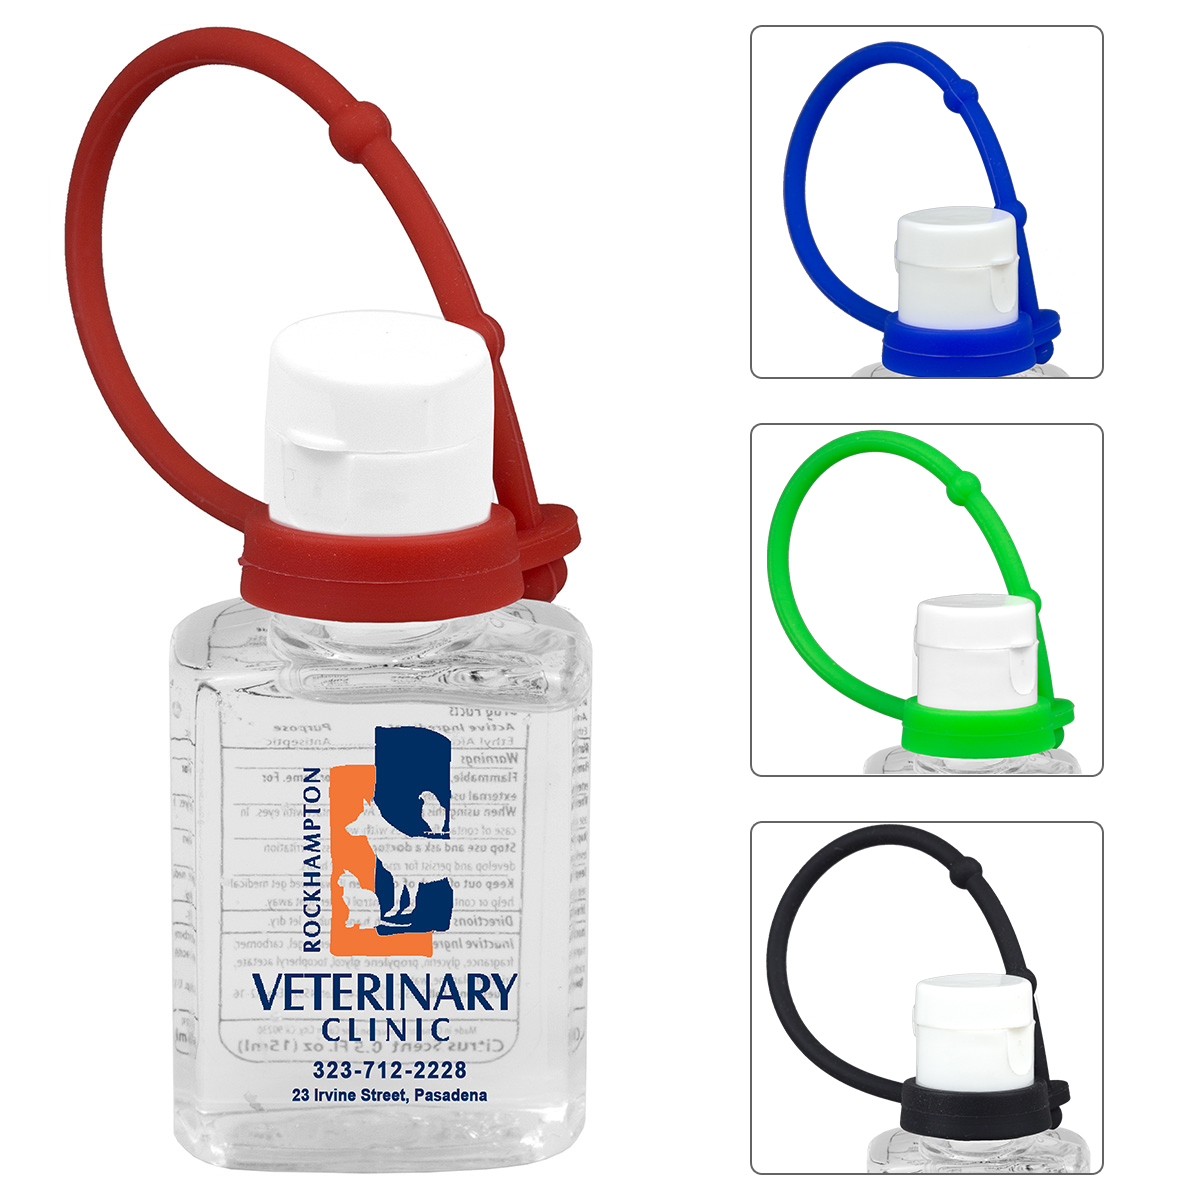 "SANPAL S" Connect” 0.5 oz Compact Hand Sanitizer Antibacterial Gel in Flip-Top Squeeze Bottle with Colorful Silicone Leash